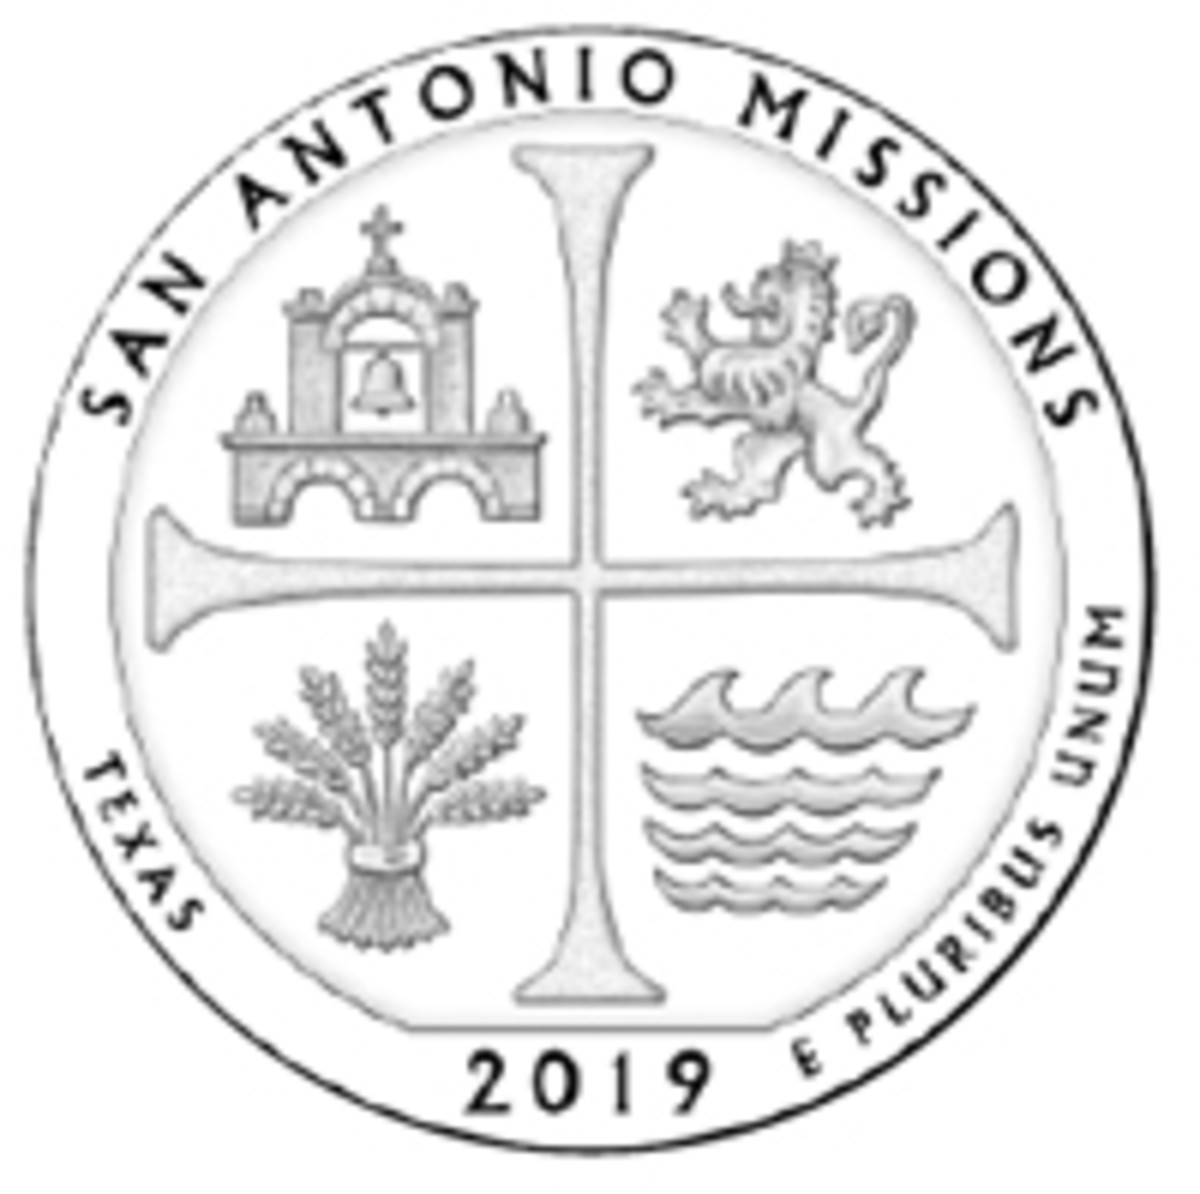  Design 03B, featuring elements of the Spanish Colonial 8-reales coin, was the committee’s clear favorite for the America the Beautiful quarter honoring San Antonio Missions National Park in Texas.